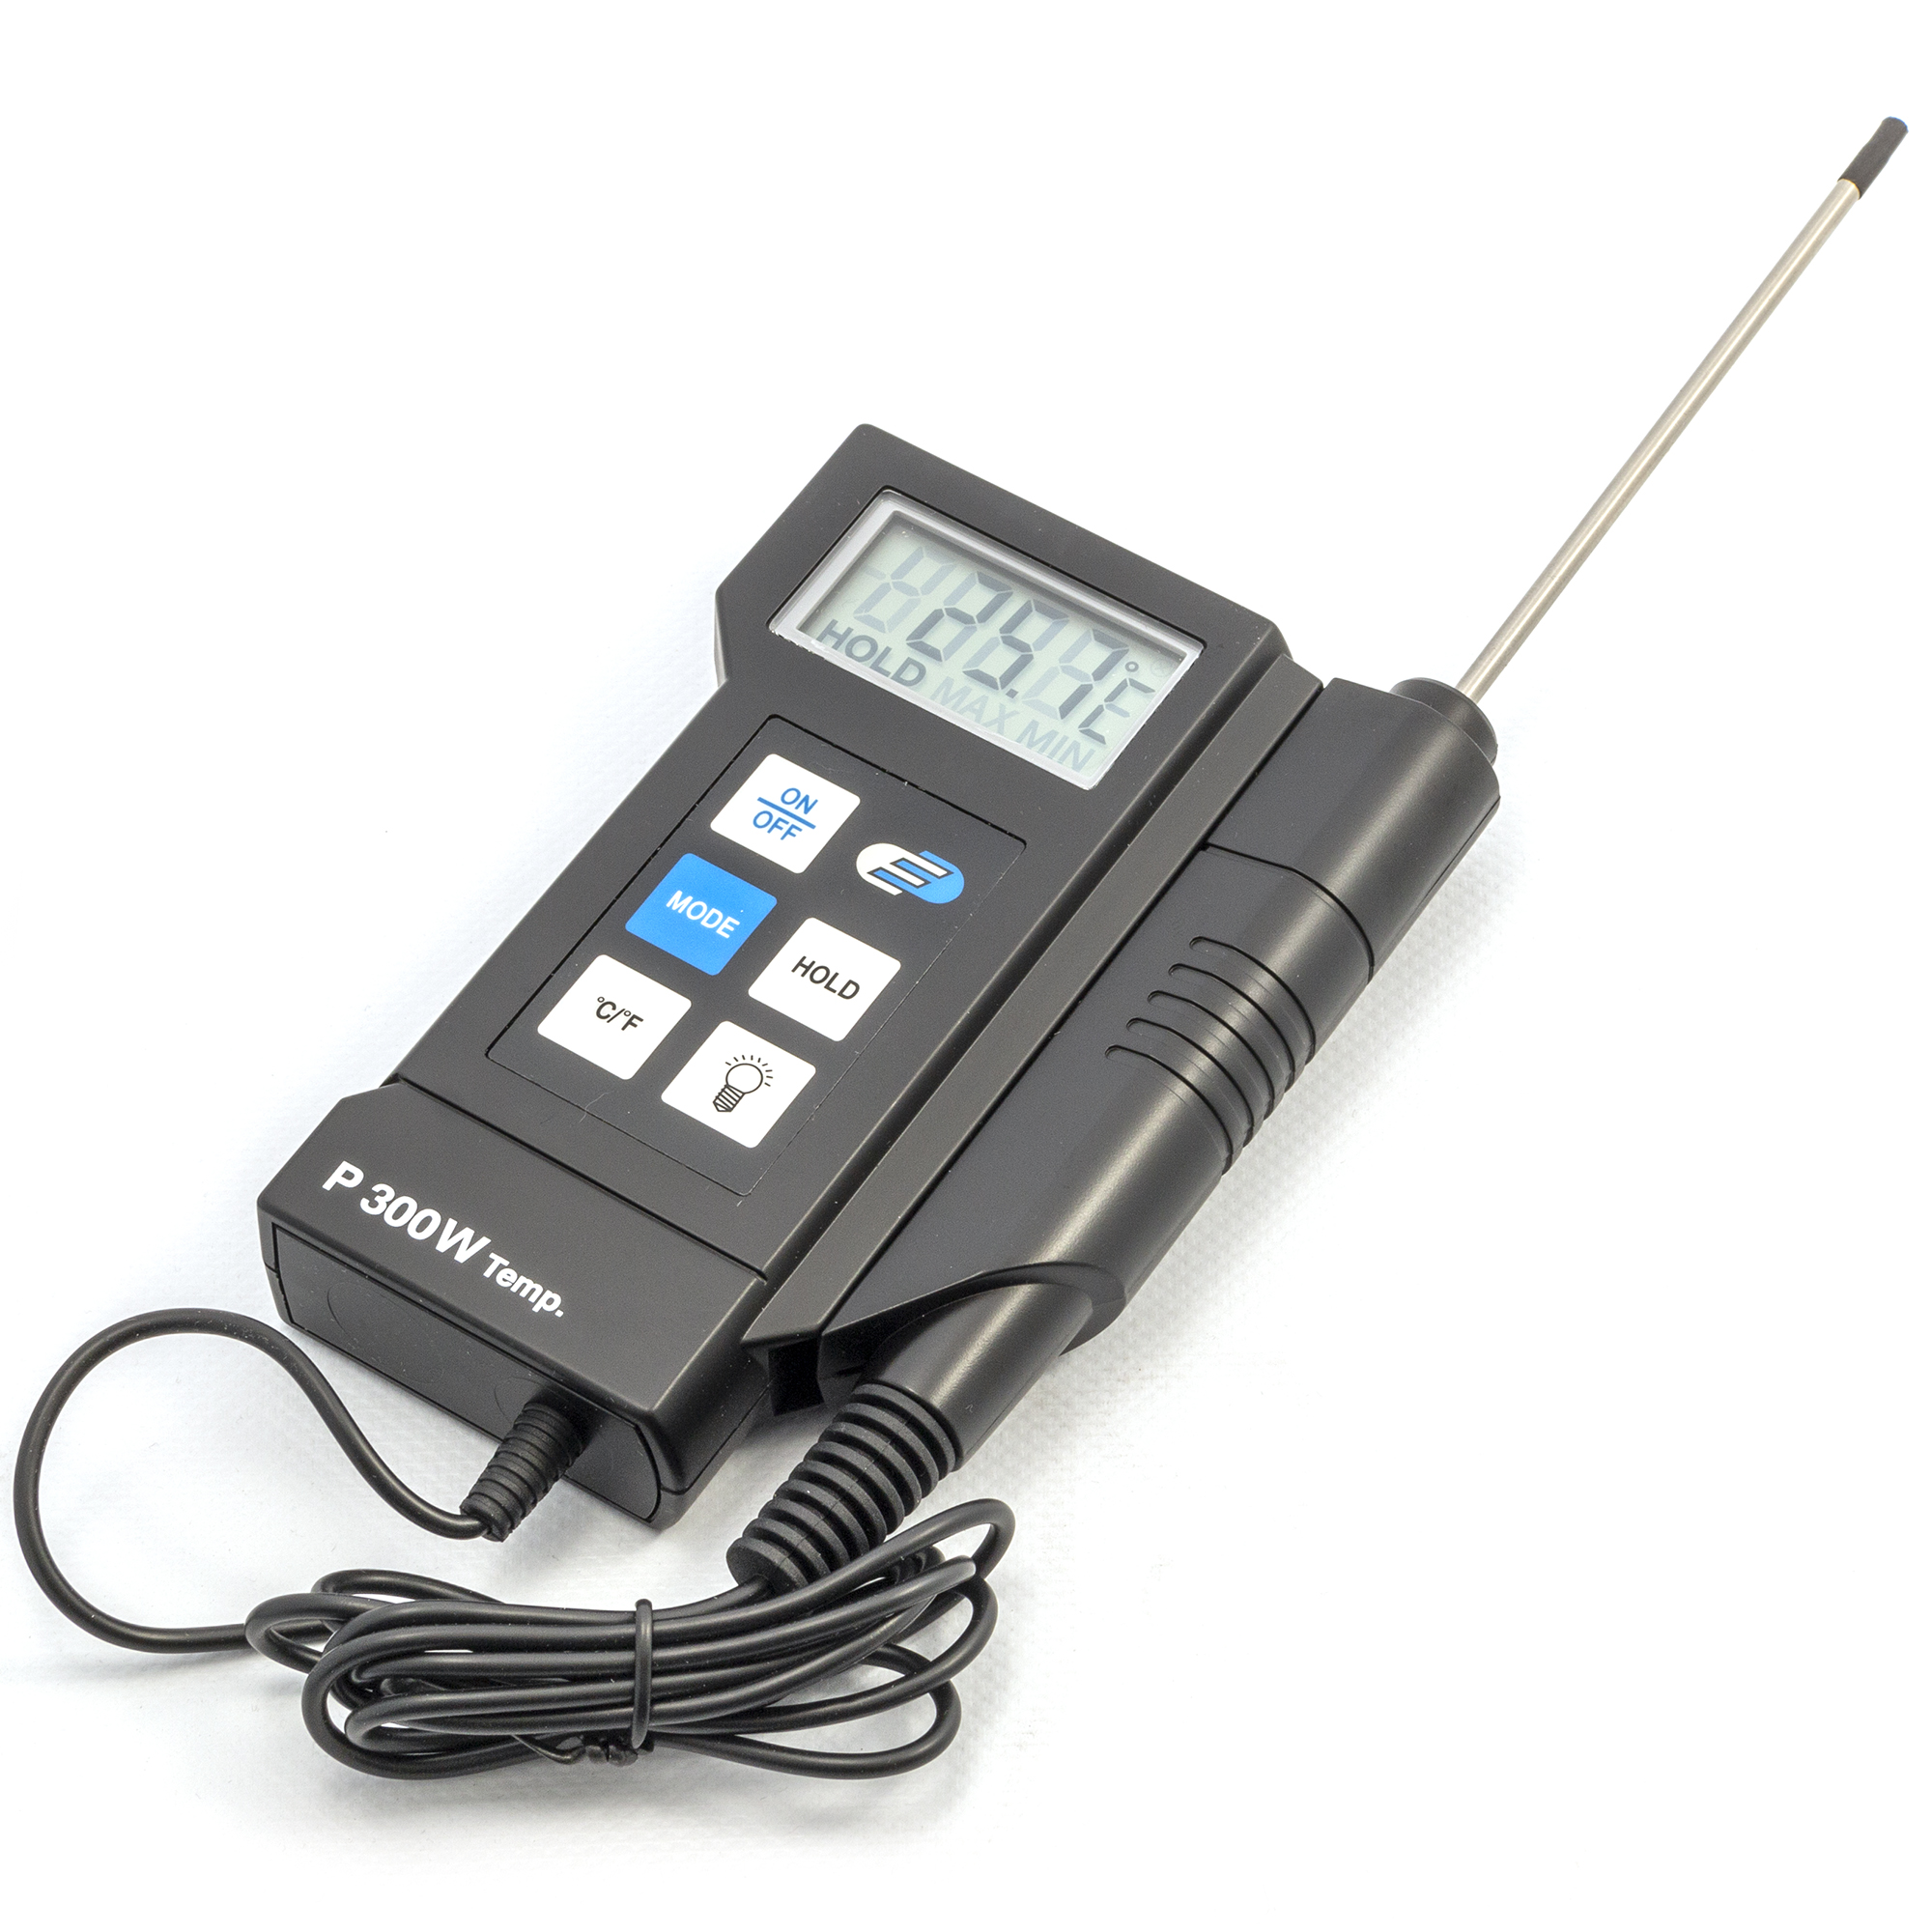 ABMT 00311020 Digitale thermometer type P 300